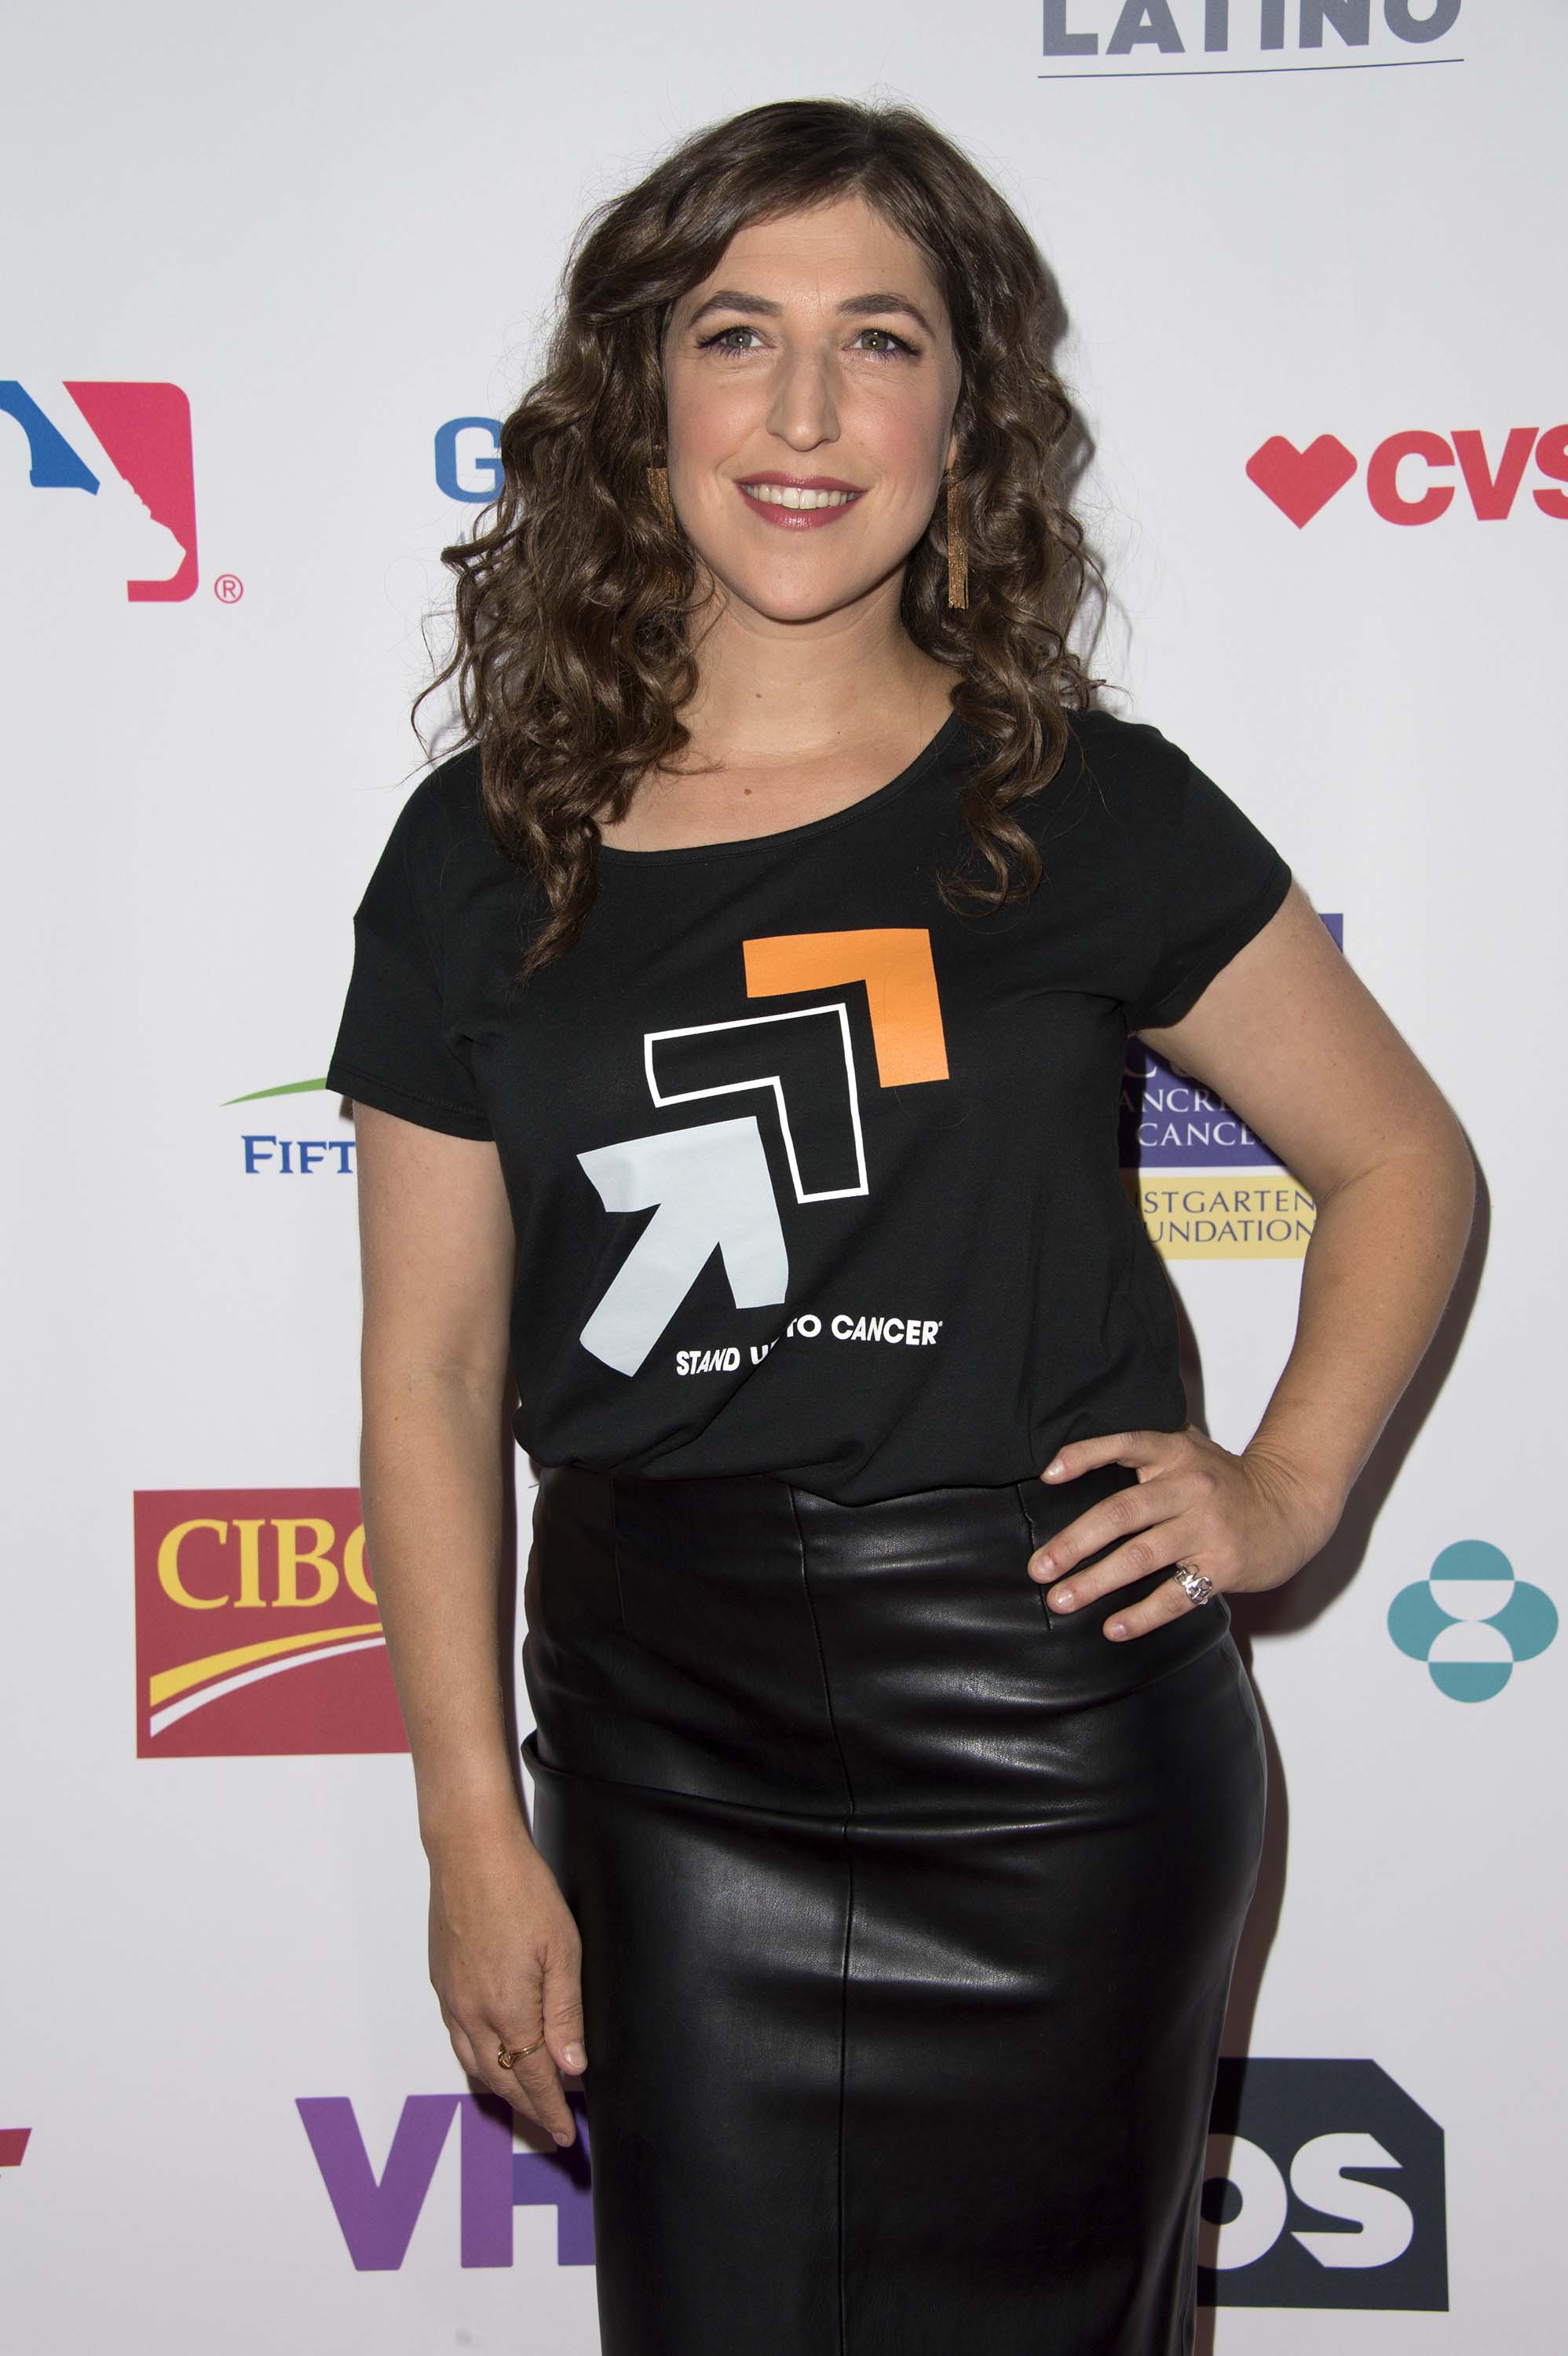 Mayim Bialik attends 5th Biennial Stand Up To Cancer